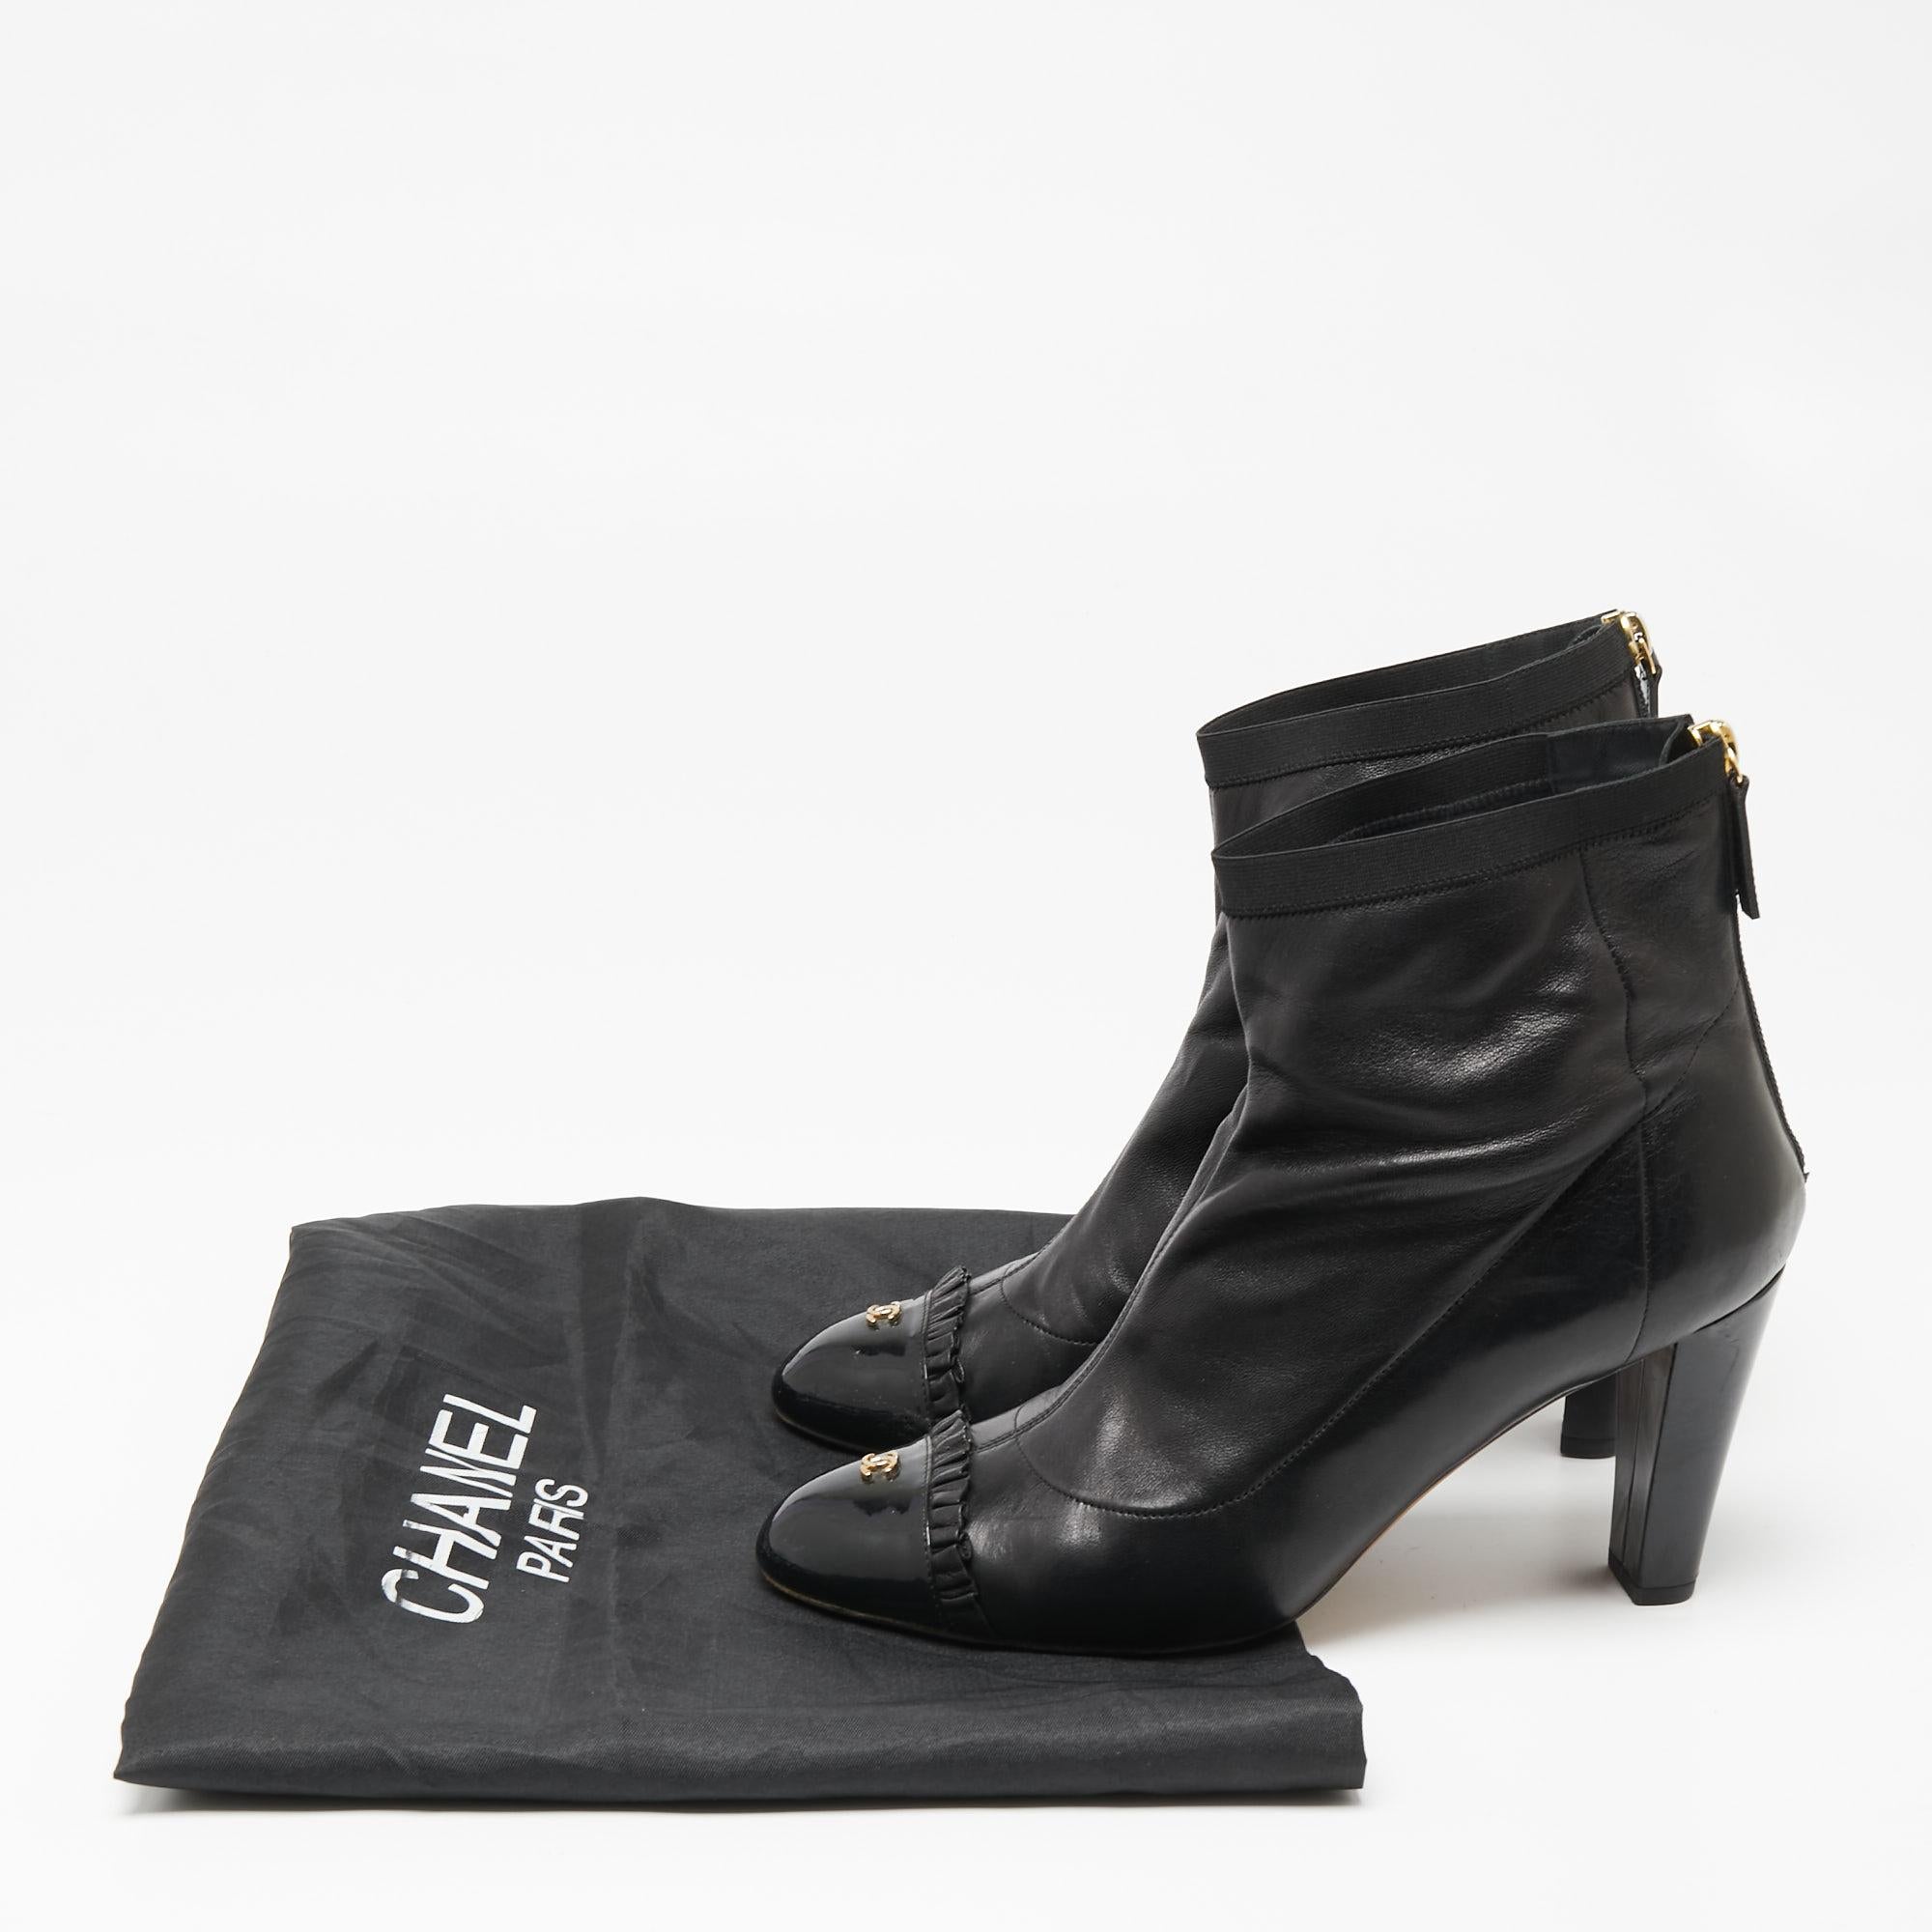 Chanel Black Leather Cap Toe Ankle Boots Size 40 4